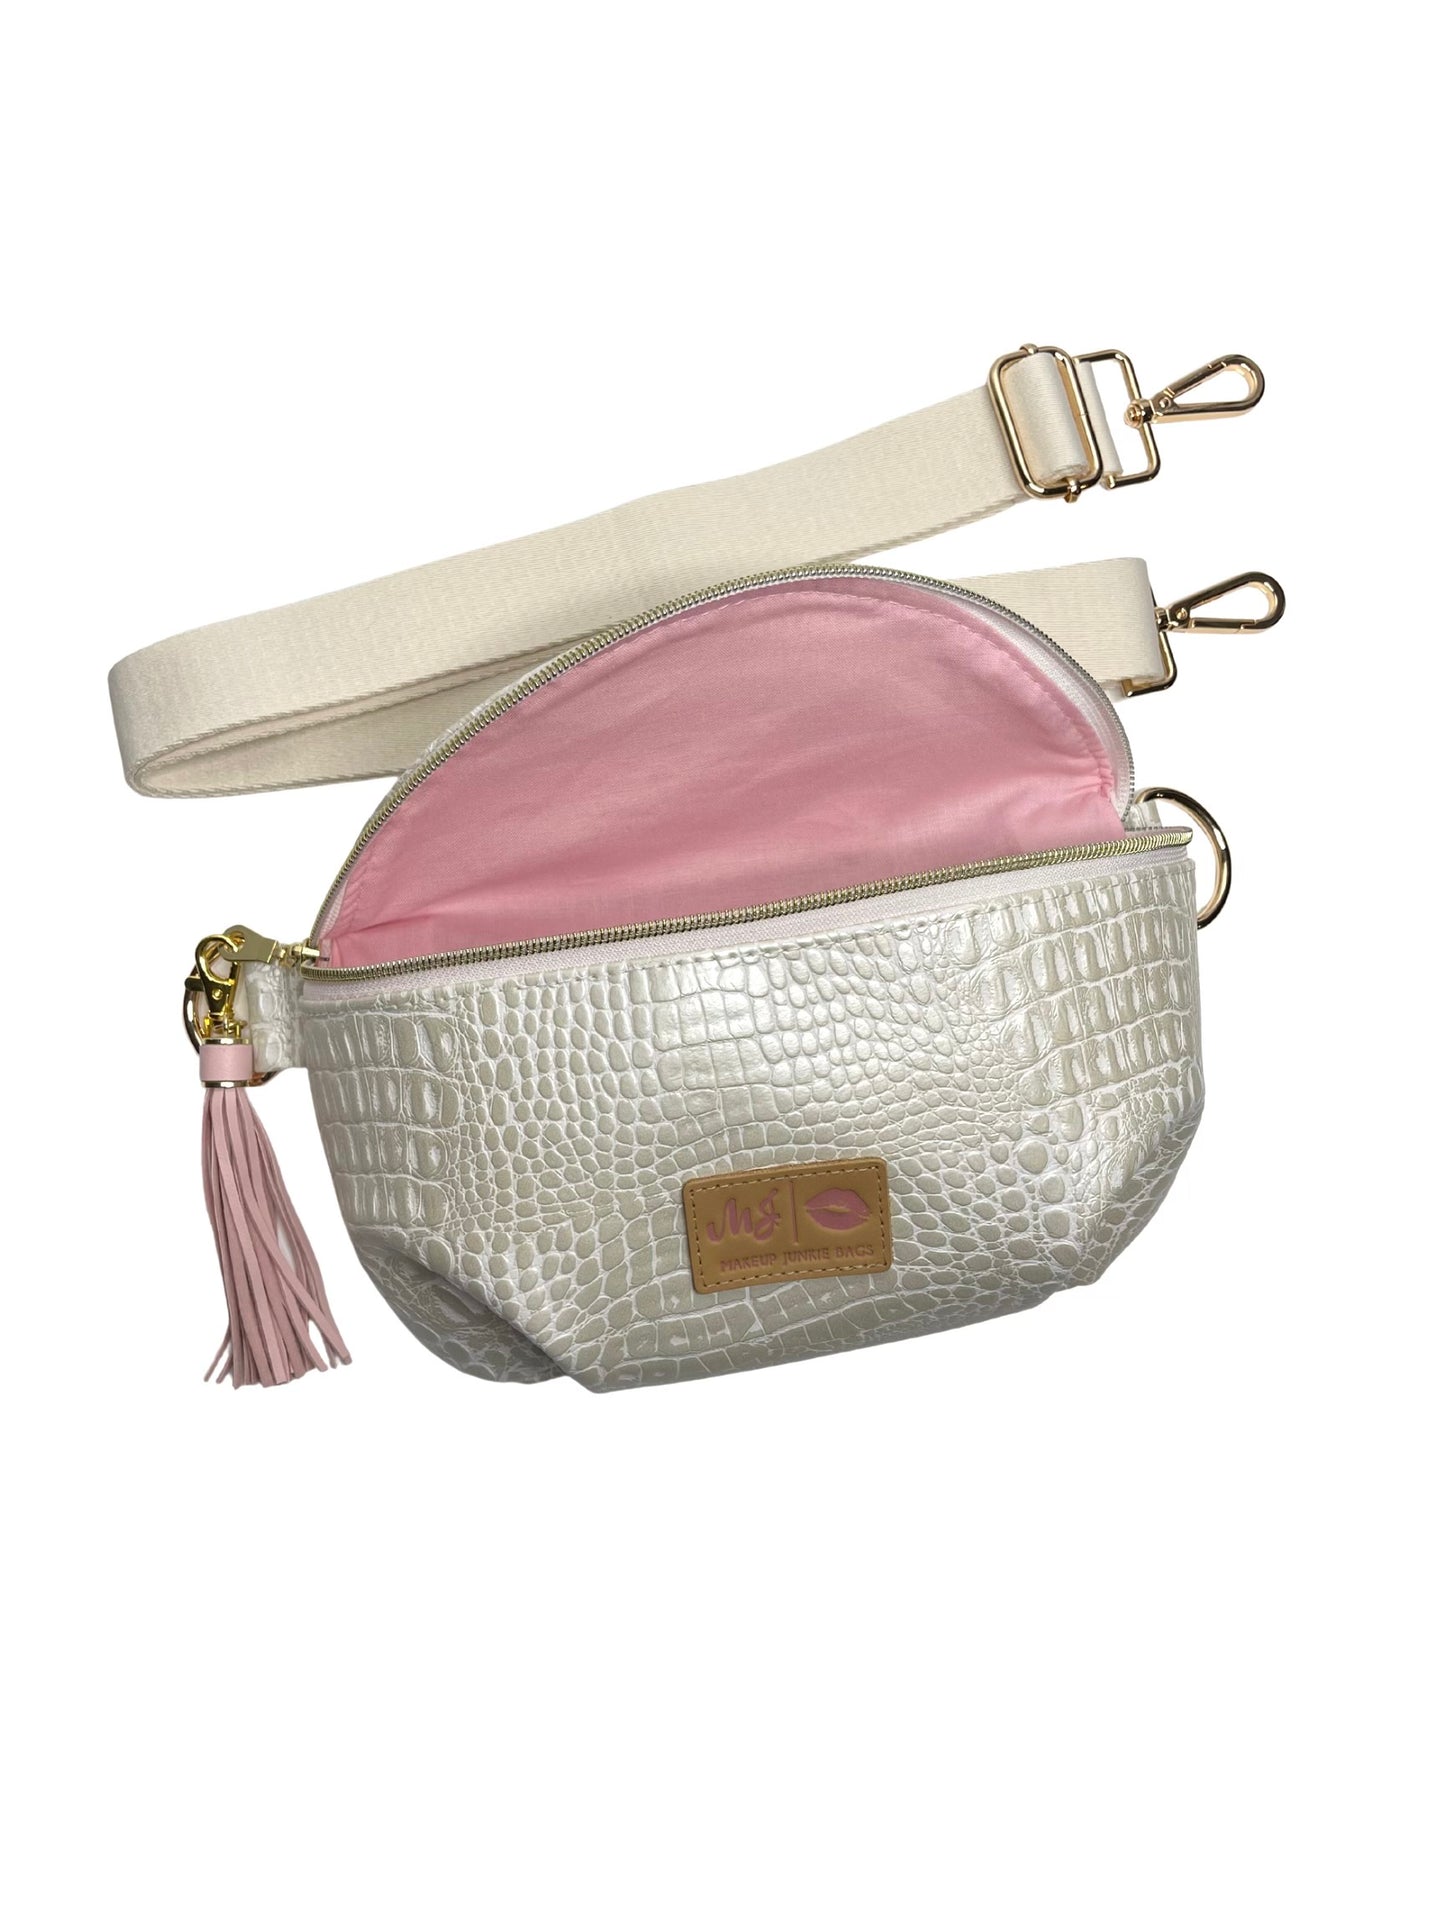 Sidekick Bag Shade of Pearl (Comes with a basic white strap. Please check out our selection of additional decorative straps for purchase.)